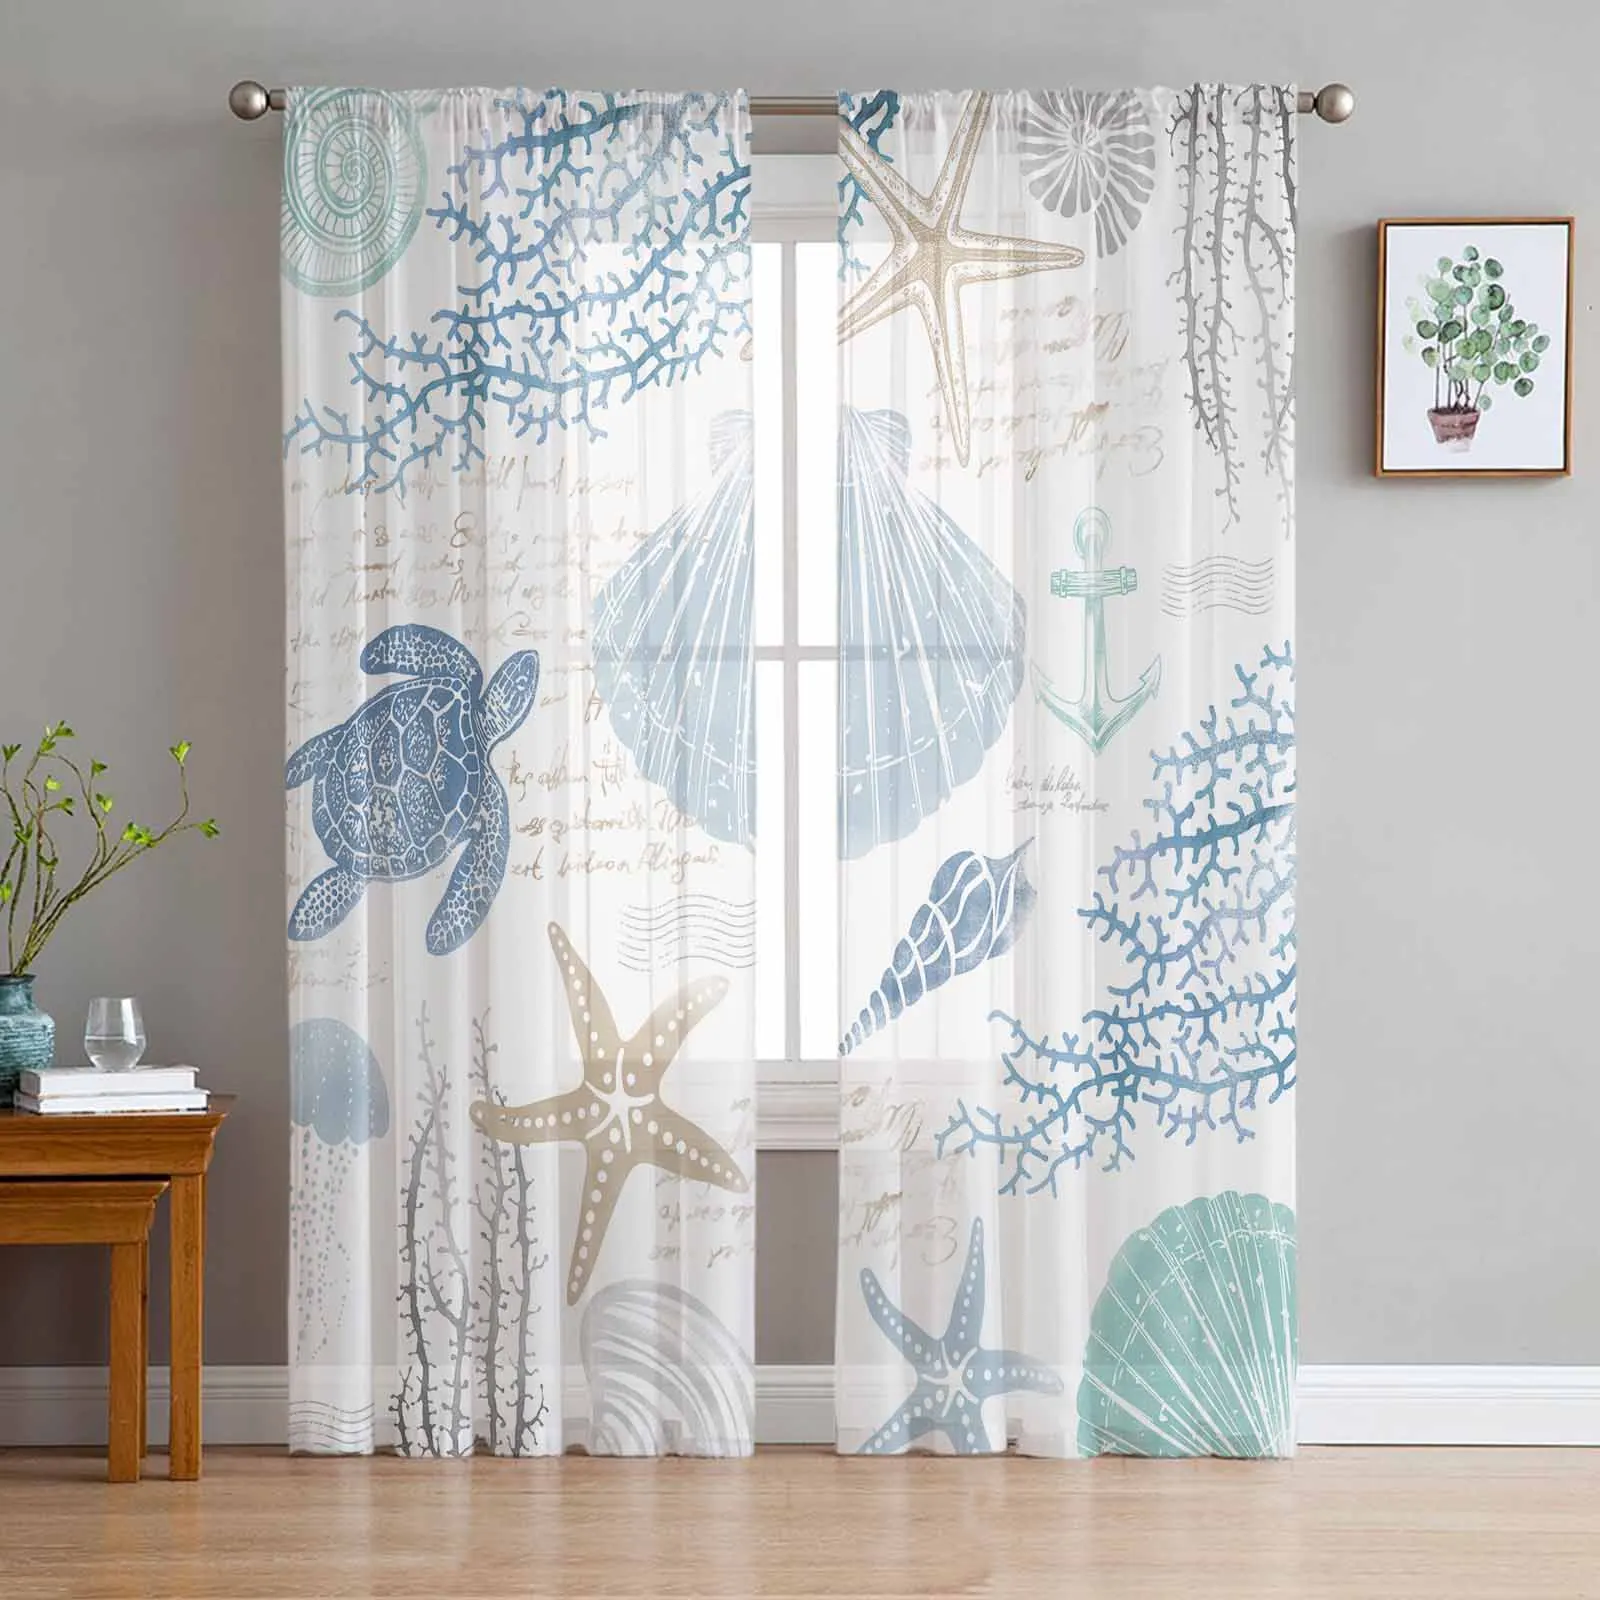 

Marine Coral Shell Turtle Jellyfish Ship Rudder Blue Sheer Curtains for Bedroom Living Room Voile Window Curtains Tulle Drapes